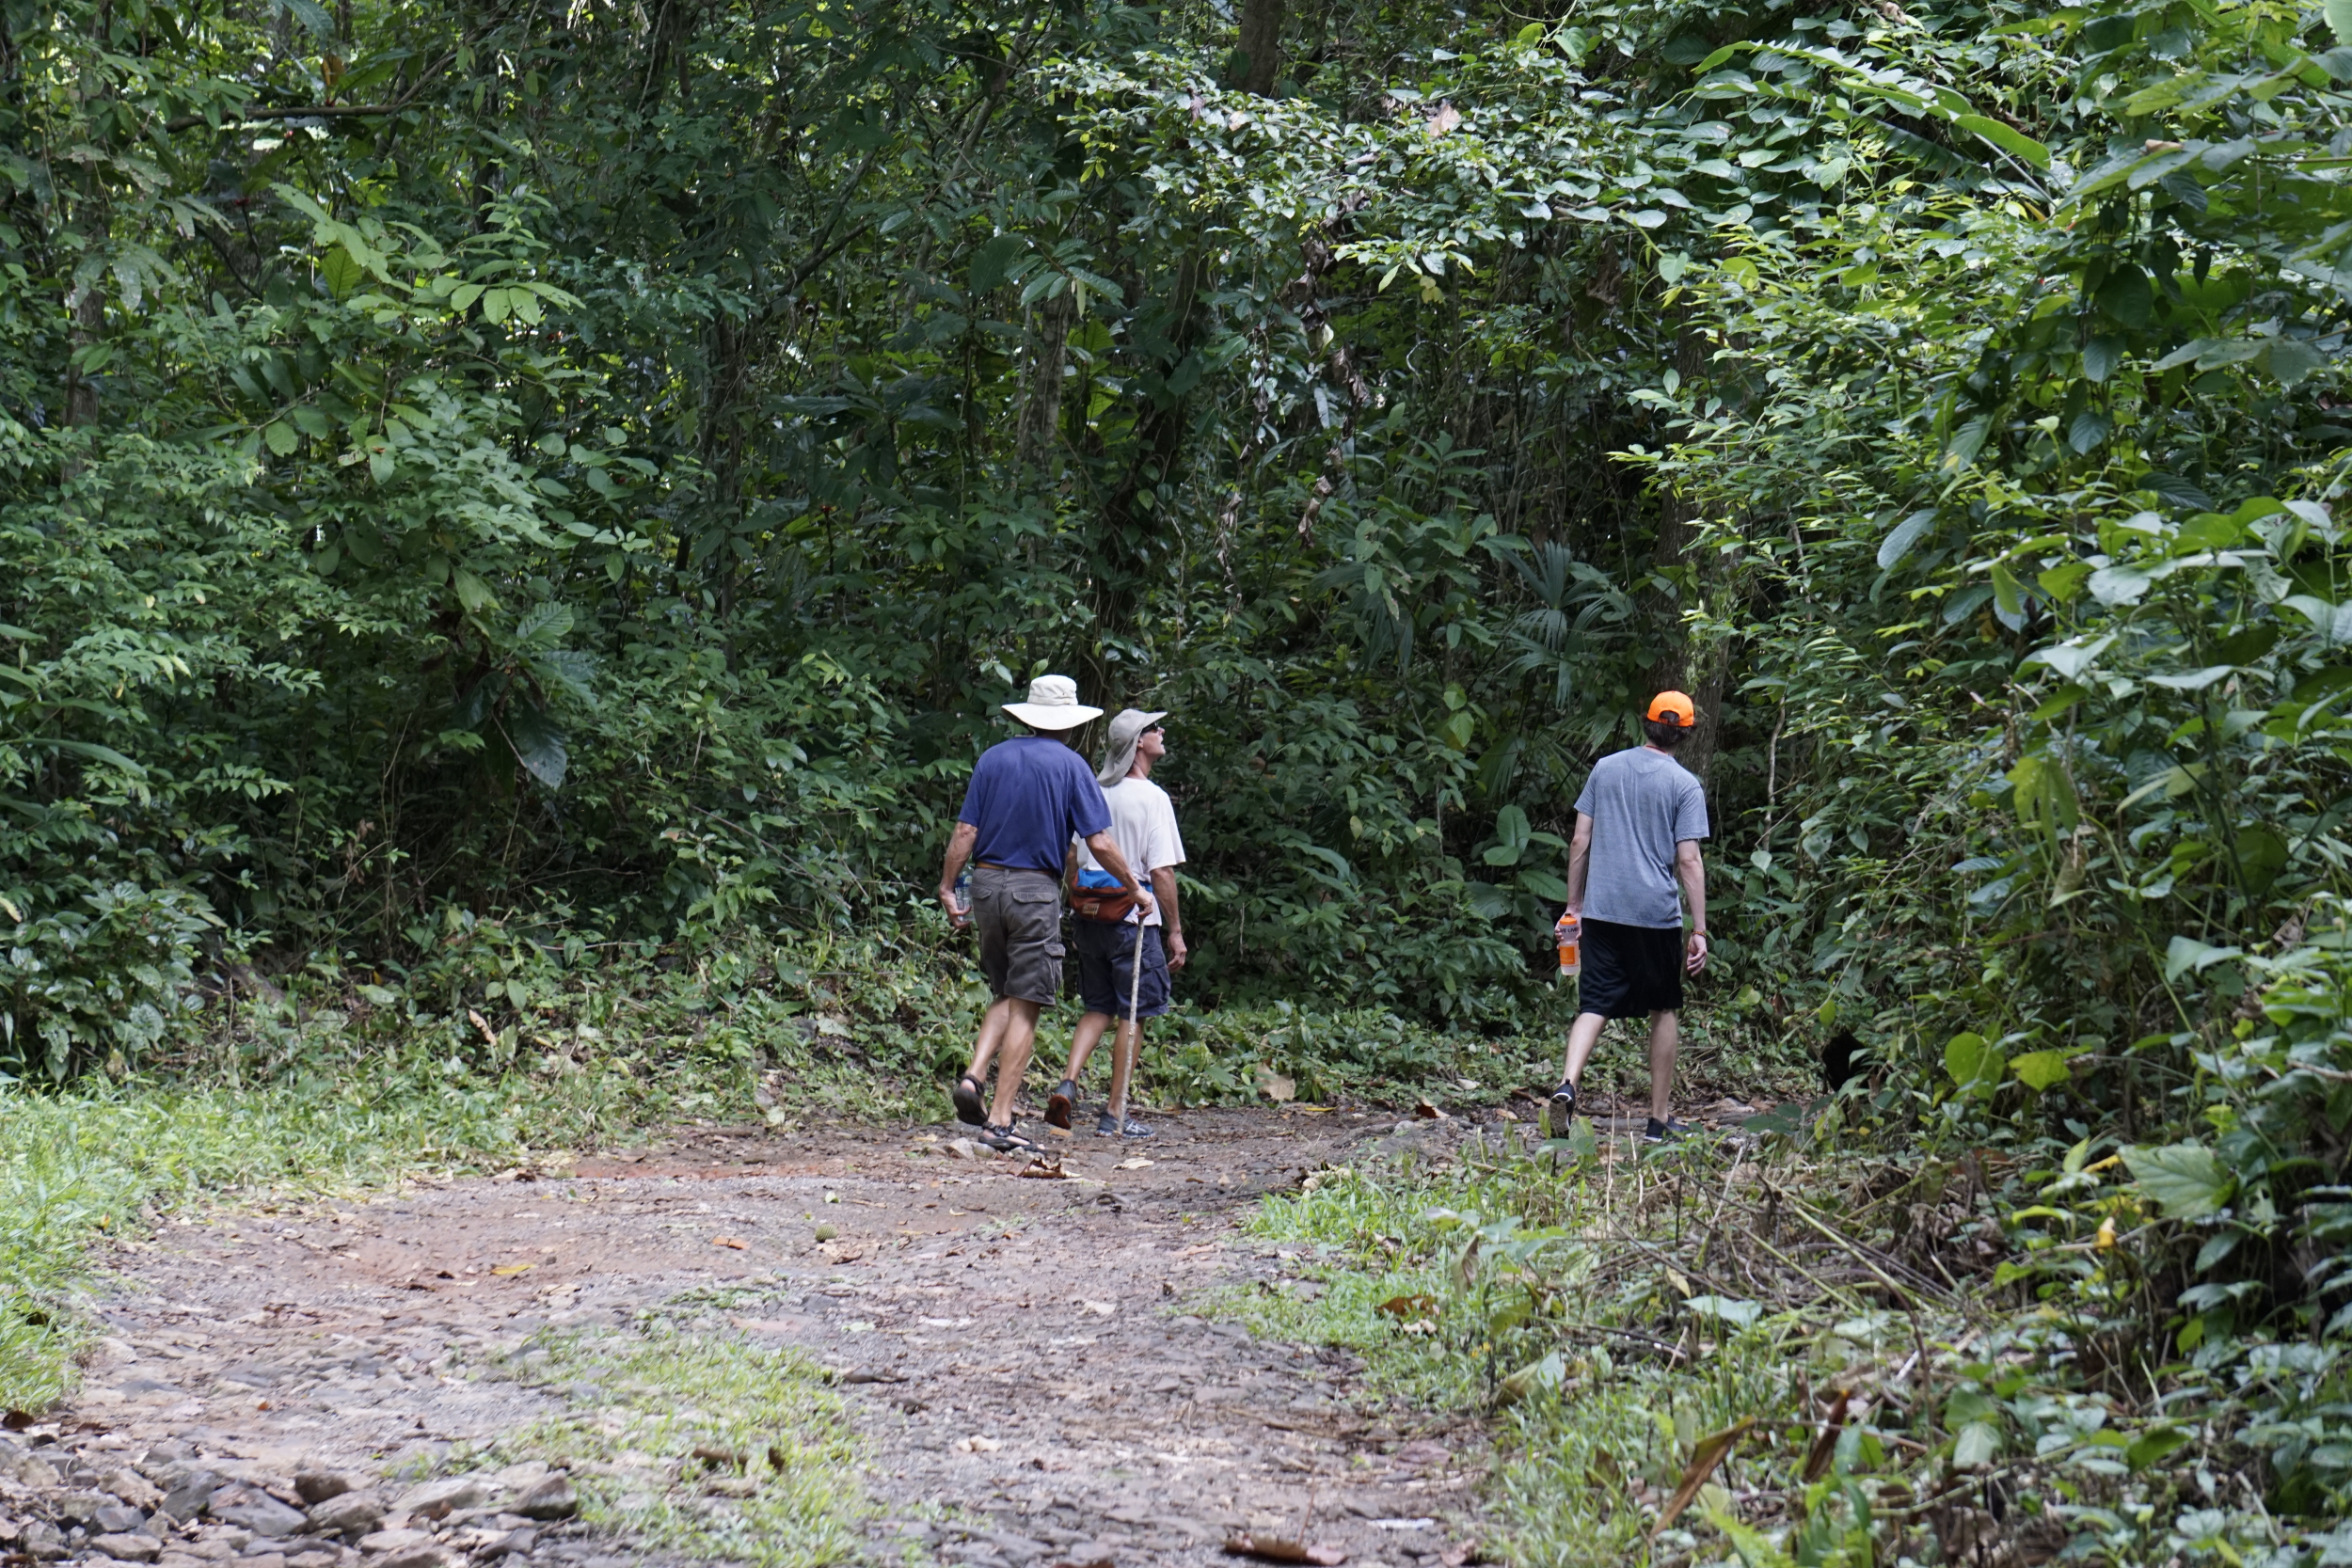 14. Hiking on the Chagres River